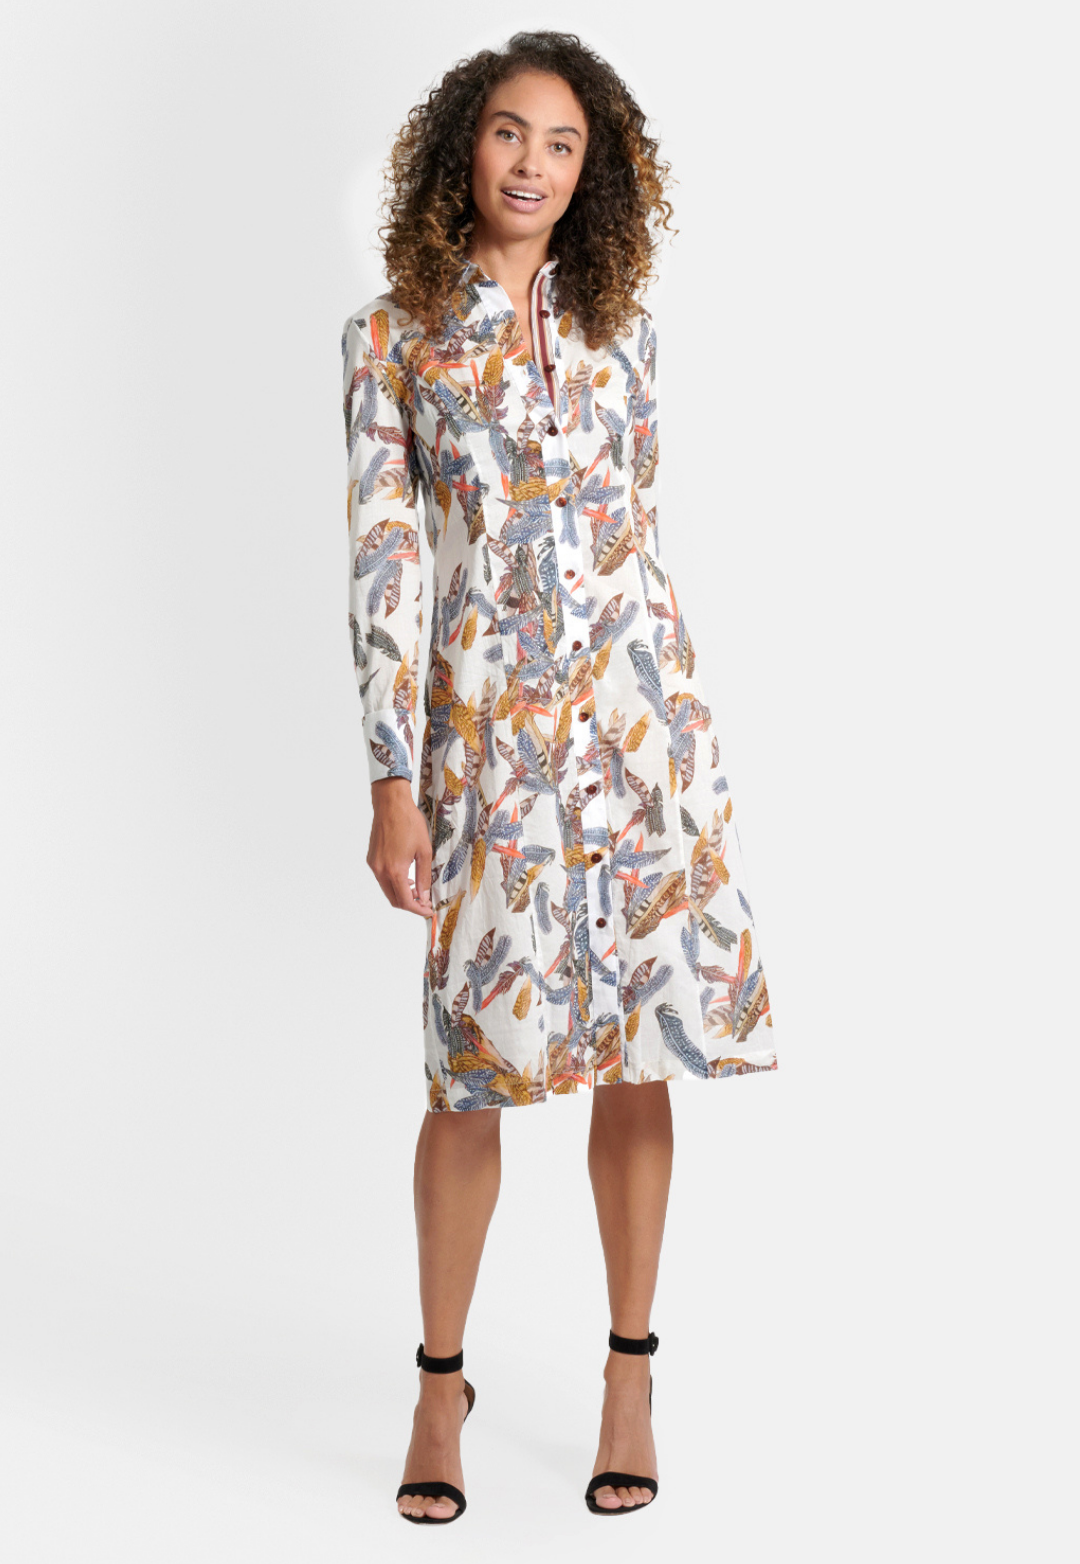 Woman wearing cotton white feather printed shirt knee length dress with French cuffs by Ala von Auersperg for fall 2020